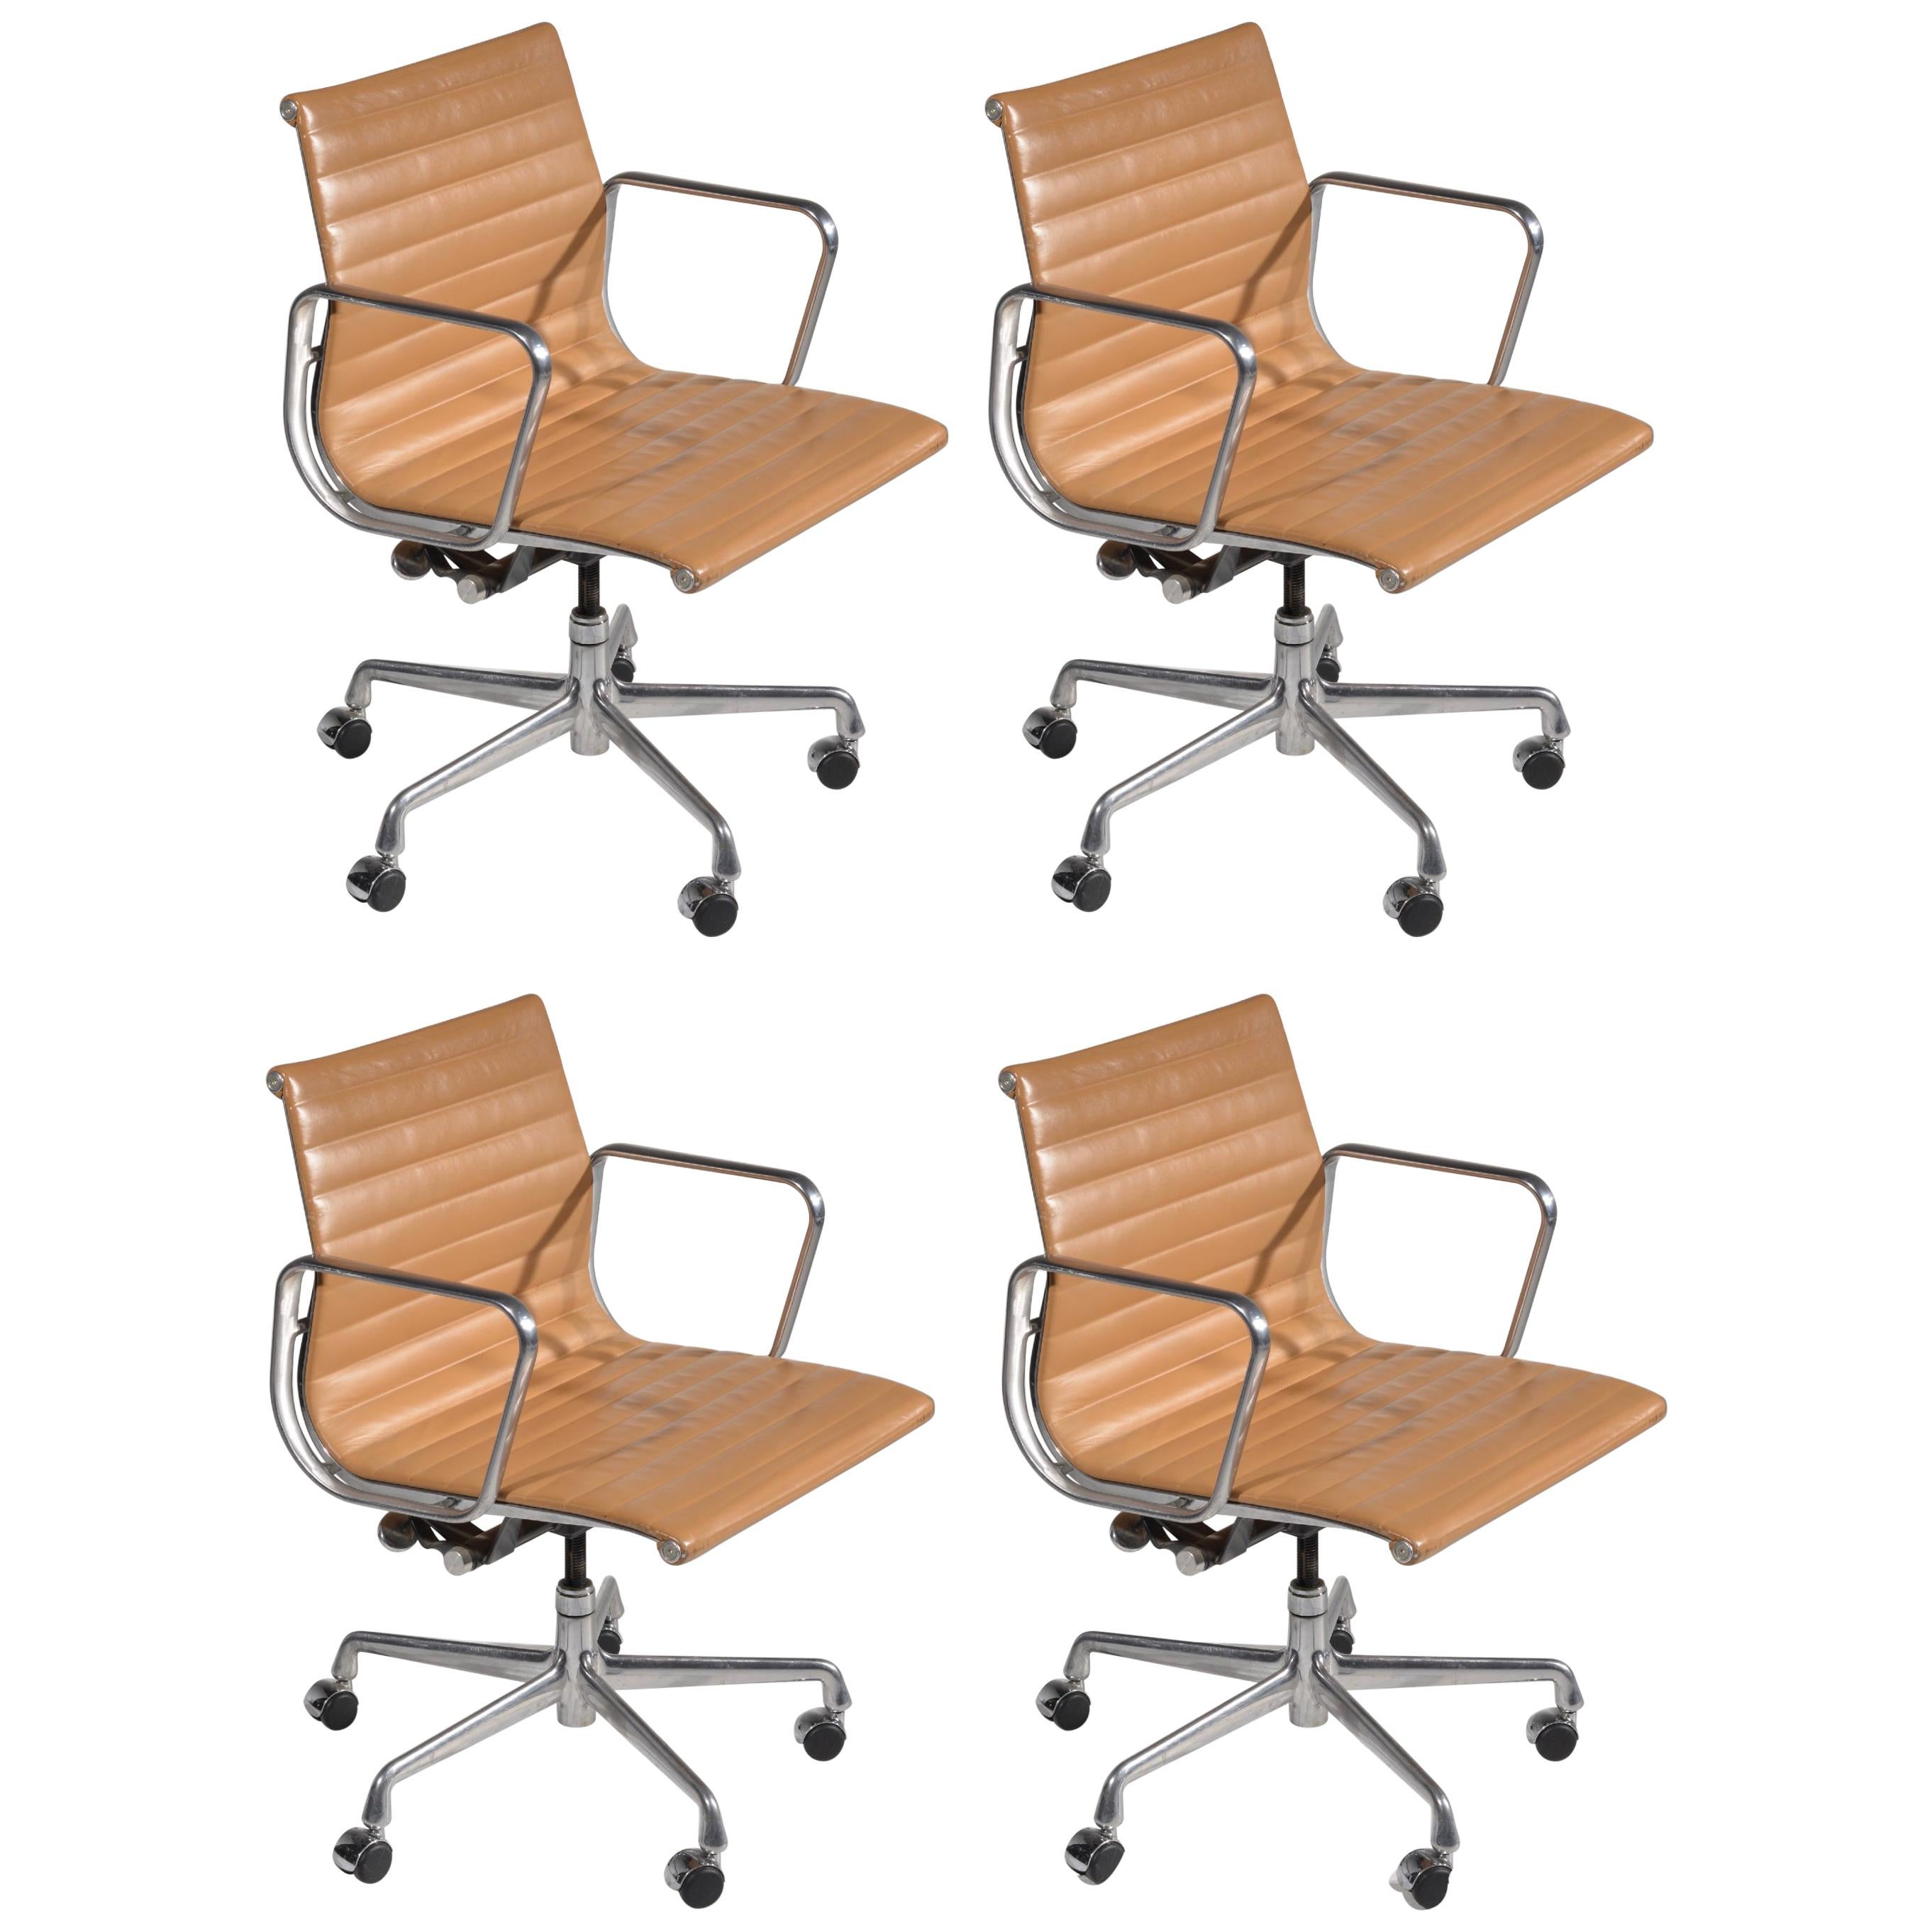 Four Vintage Eames Aluminum Group Leather "Management" Chairs in Tan Leather